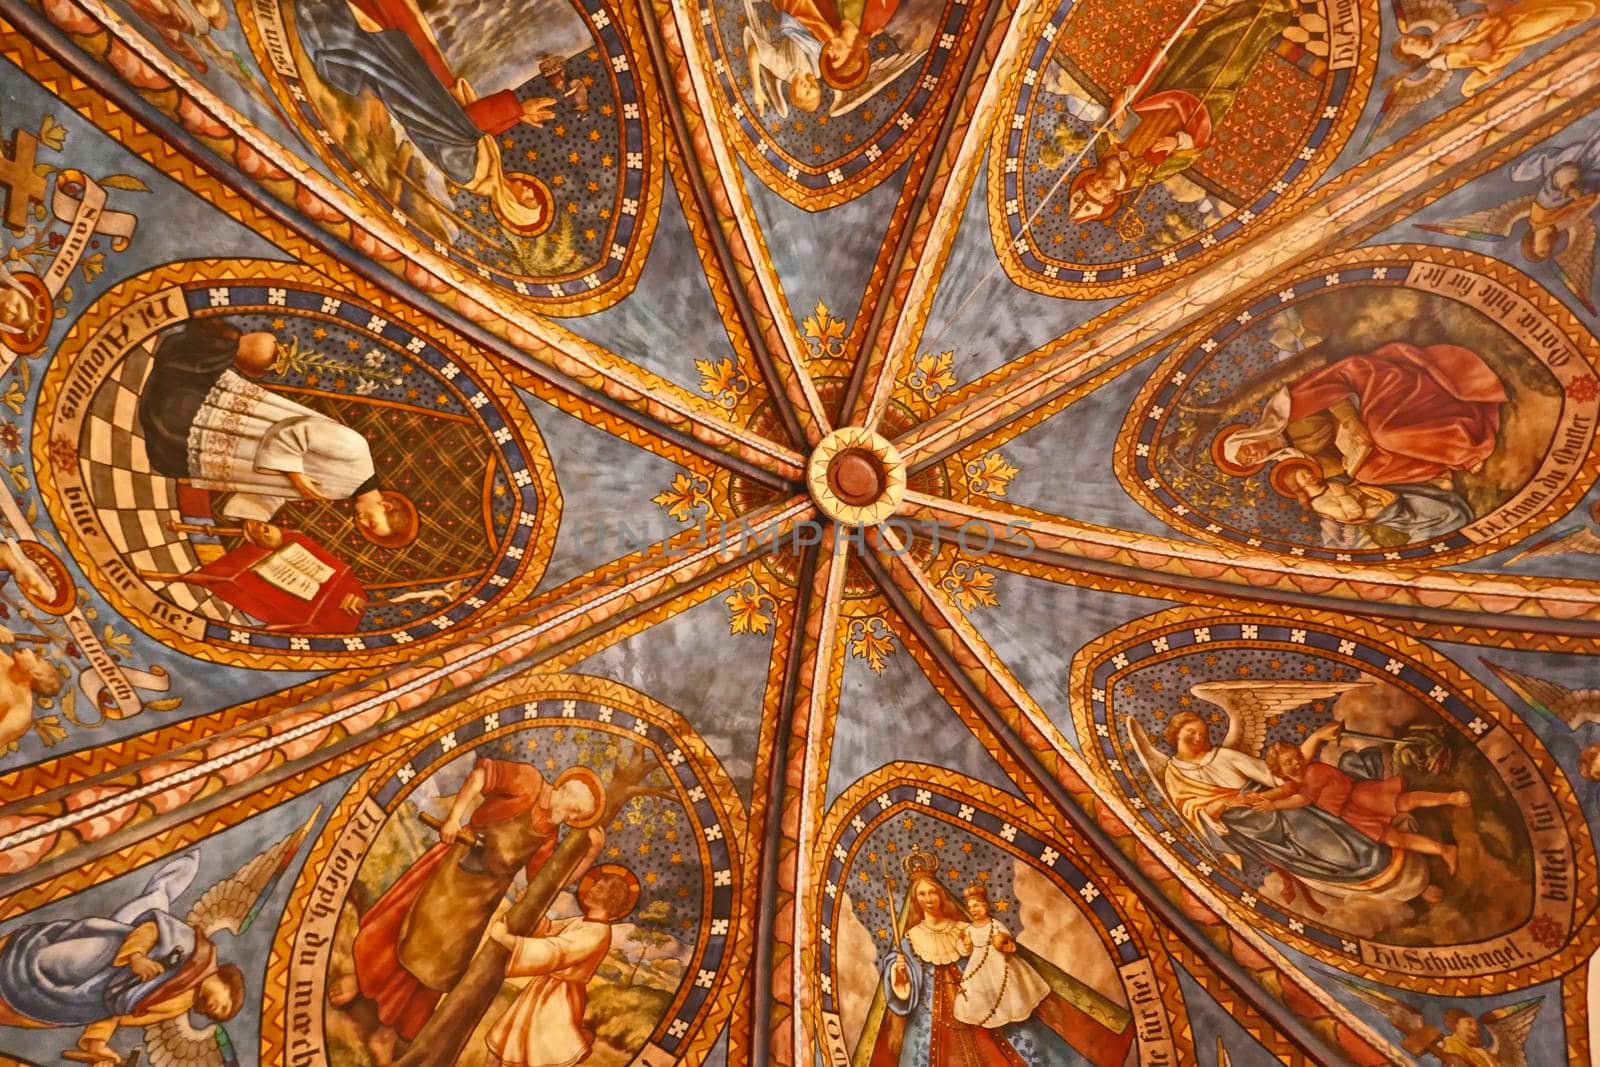 Rheine, NRW, Germany - August 24 2022 Art in the St. Dionysius church. The star-vaulted ceiling of the old sacristy, showing the patron saints of different groups within the community.